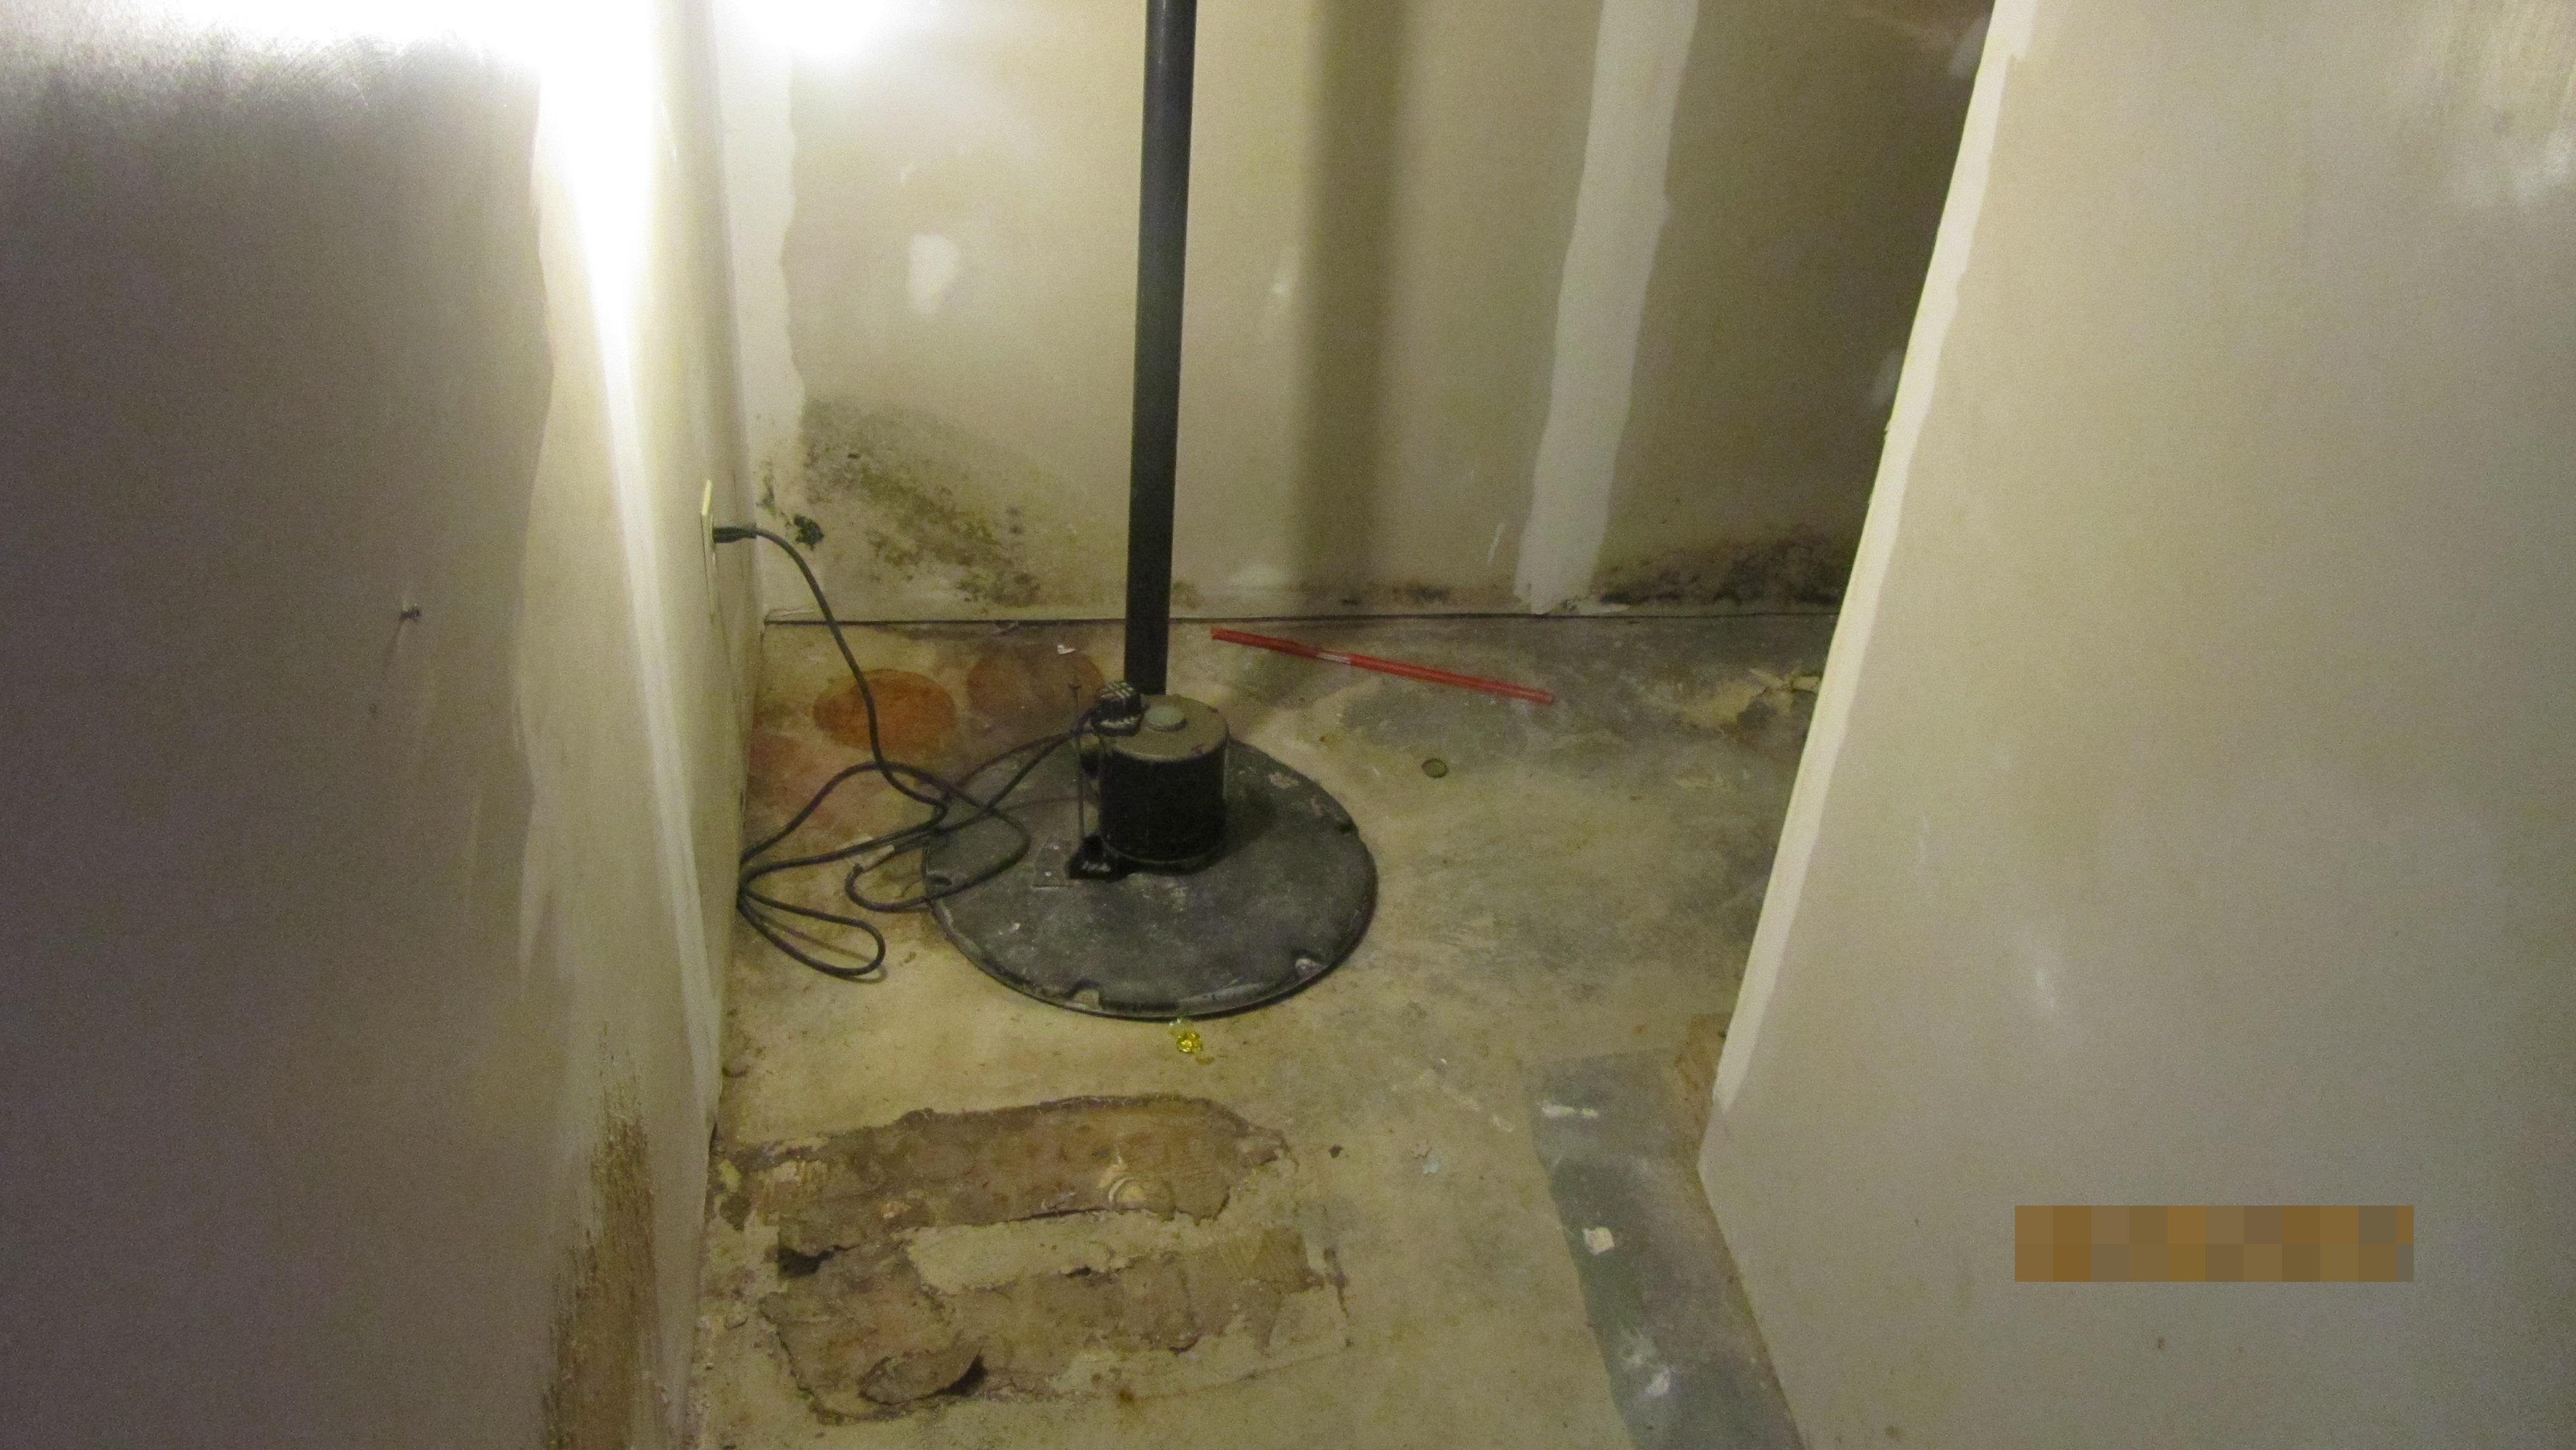 Sump pump not working, crating Mold